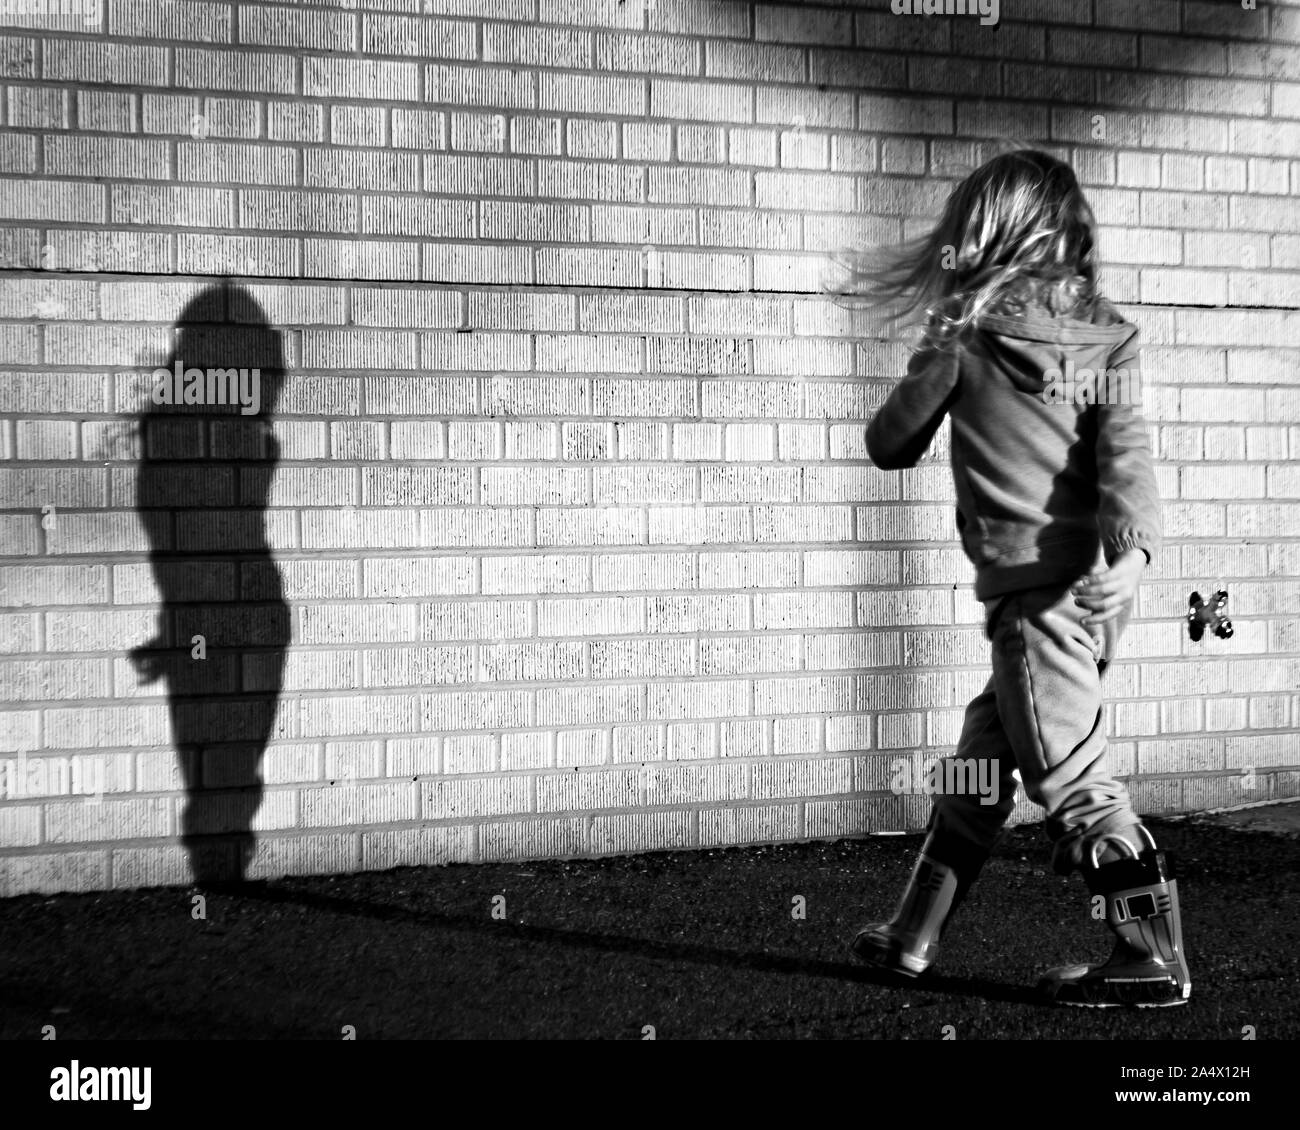 Dancing With Her Shadow Stock Photo